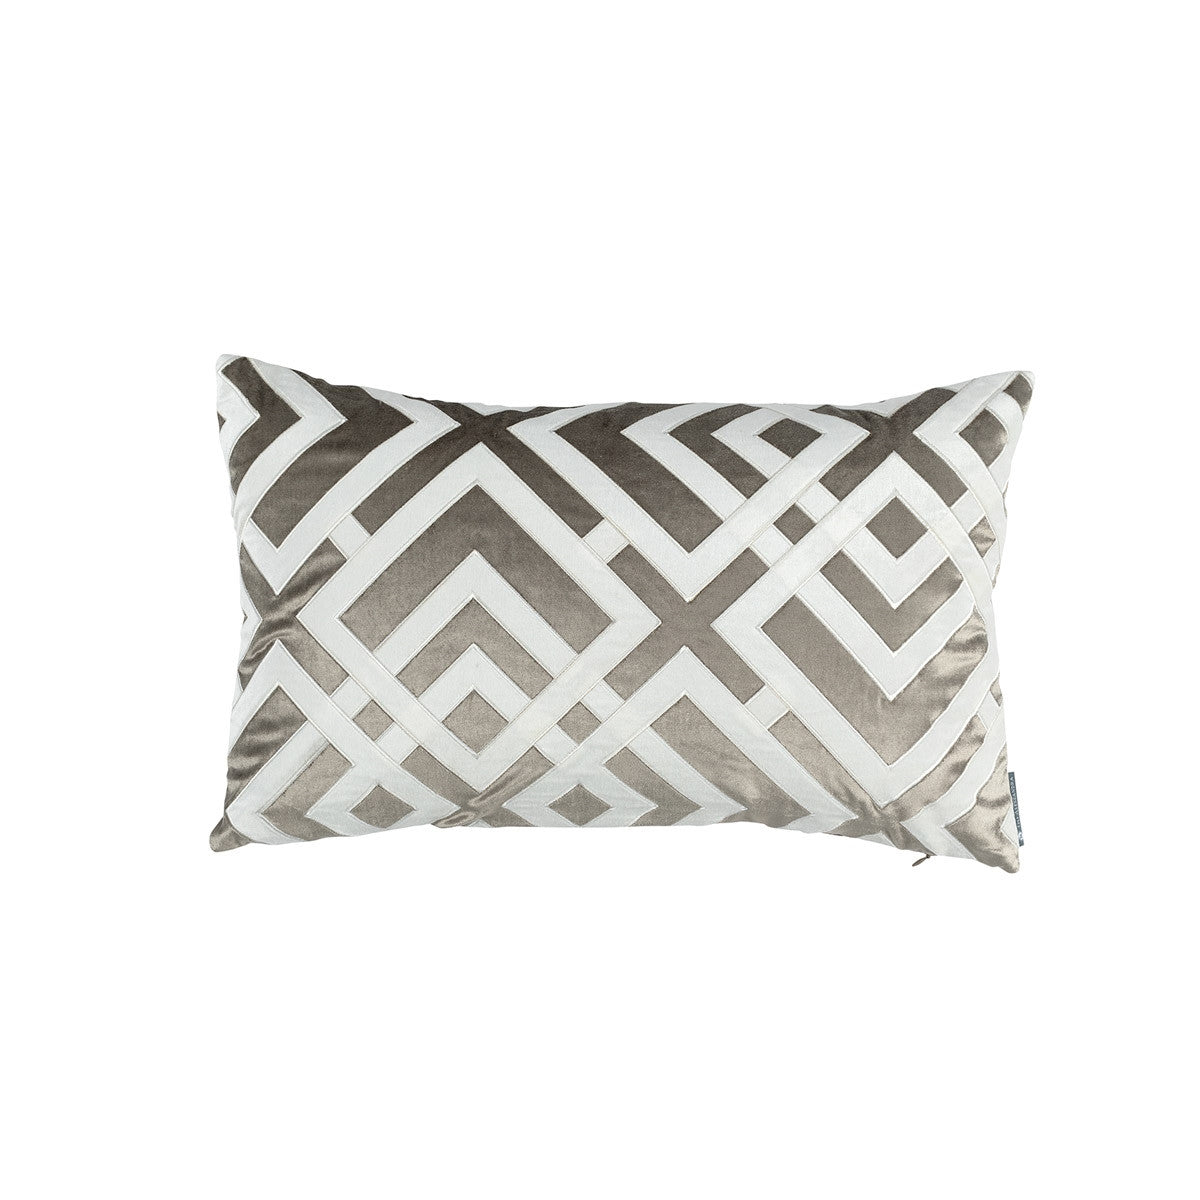 Lili Alessandra Karl Small Rectangle Pillow - Fawn/Ivory